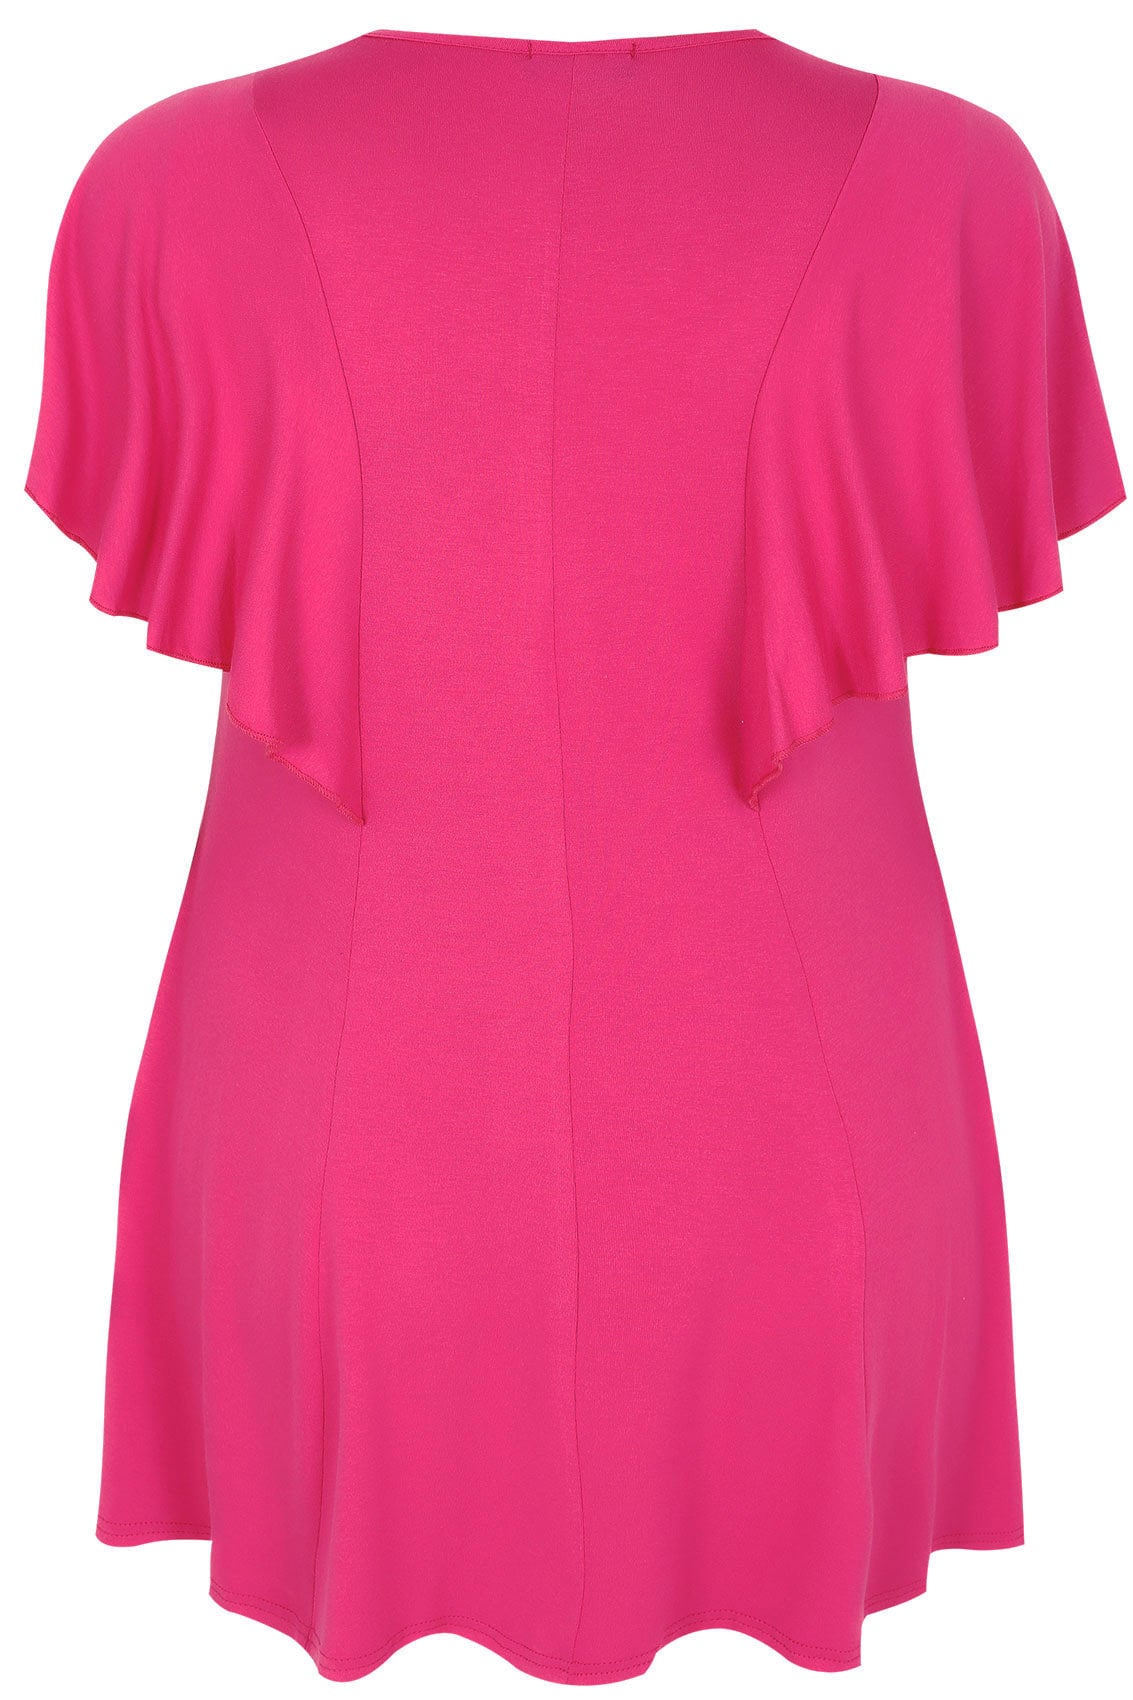 Hot Pink Peplum Top With Frill Angel Sleeves, Plus size 16 